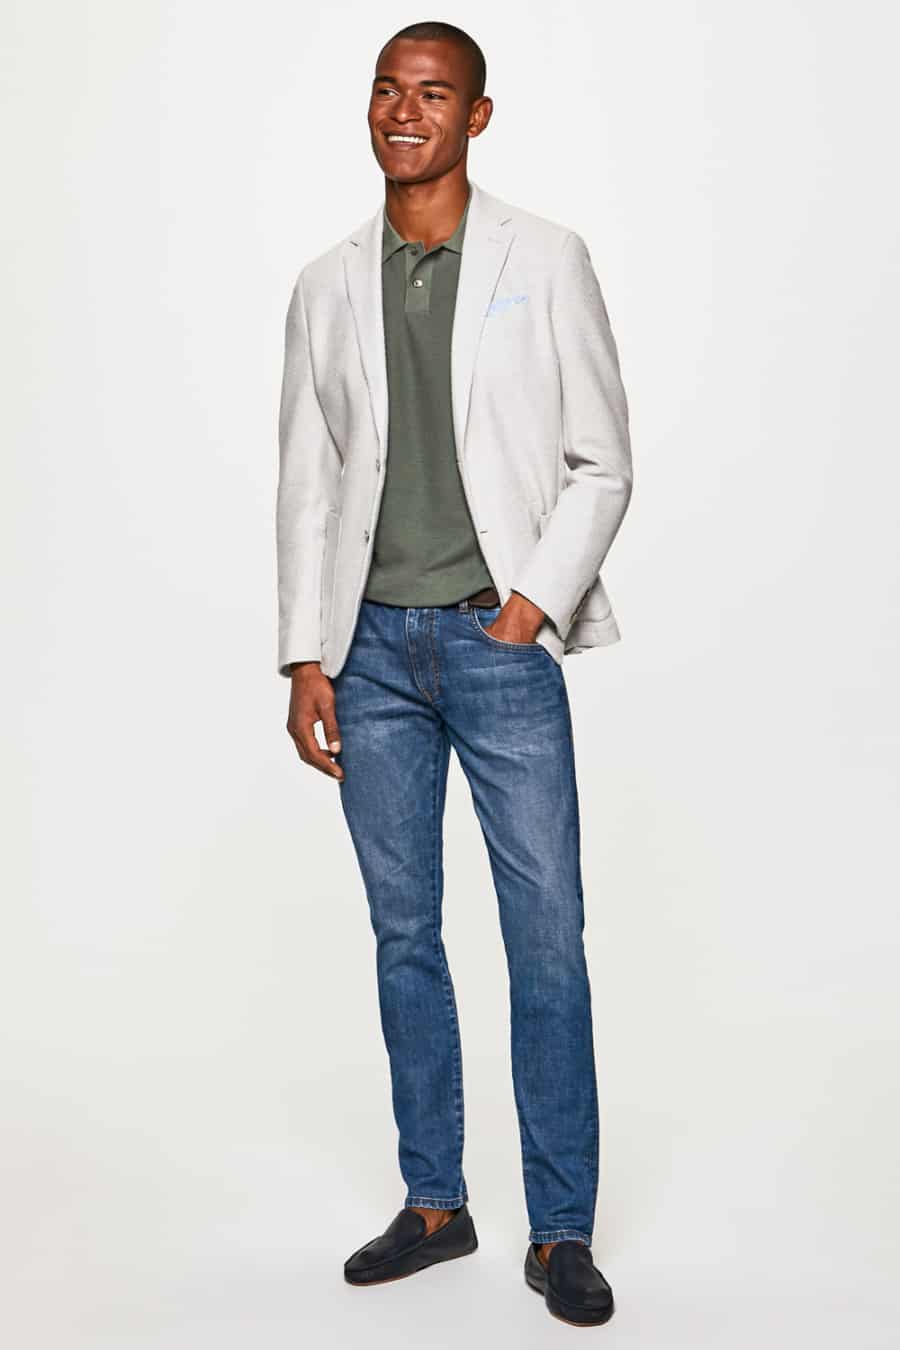 Men's light wash jeans, white blazer, green polo shirt and driving shoes outfit